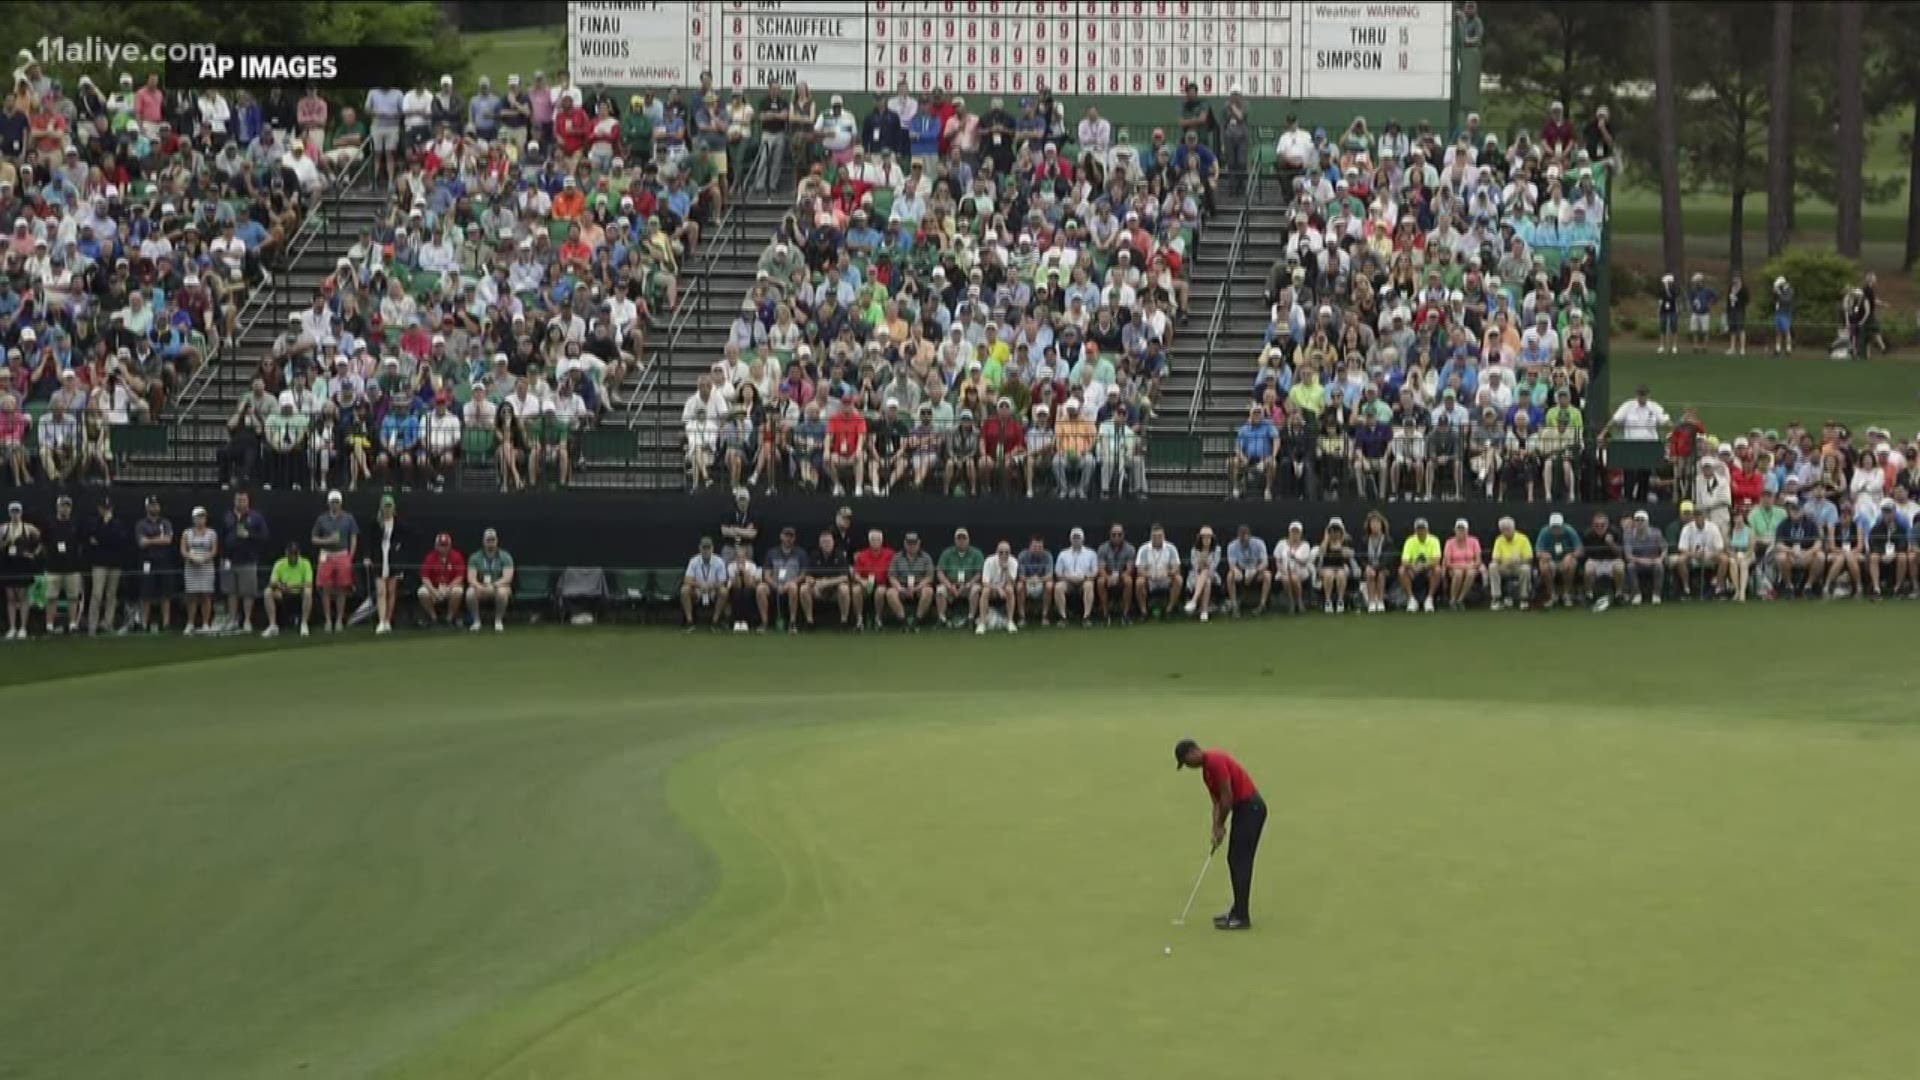 11Alive Sports reporter Wes Blakenship reflects on watching Tiger Woods win the Masters.